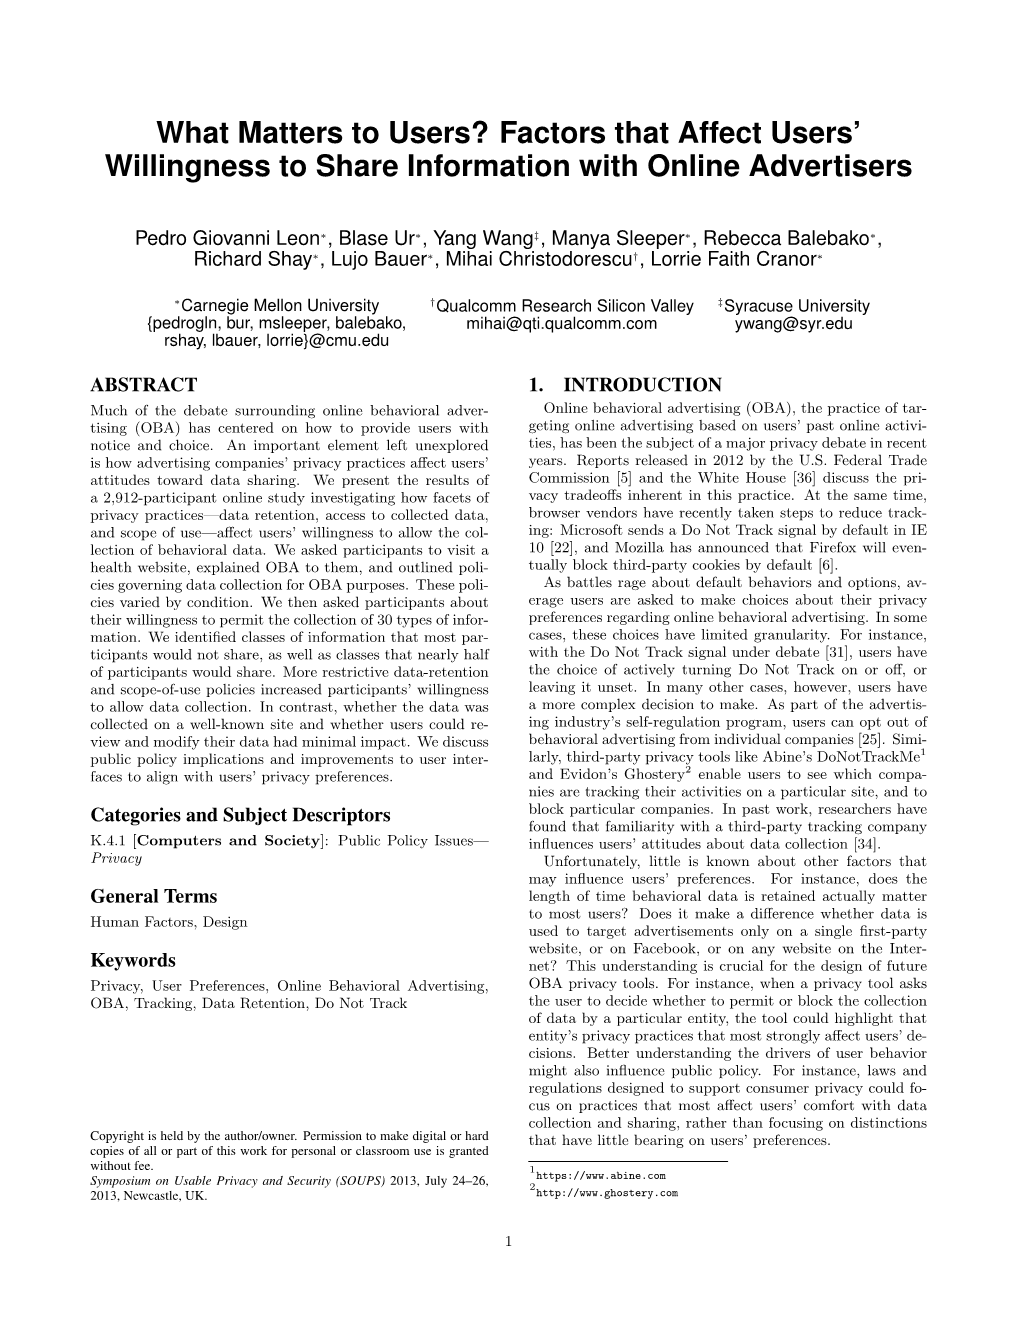 Factors That Affect Users' Willingness to Share Information with Online